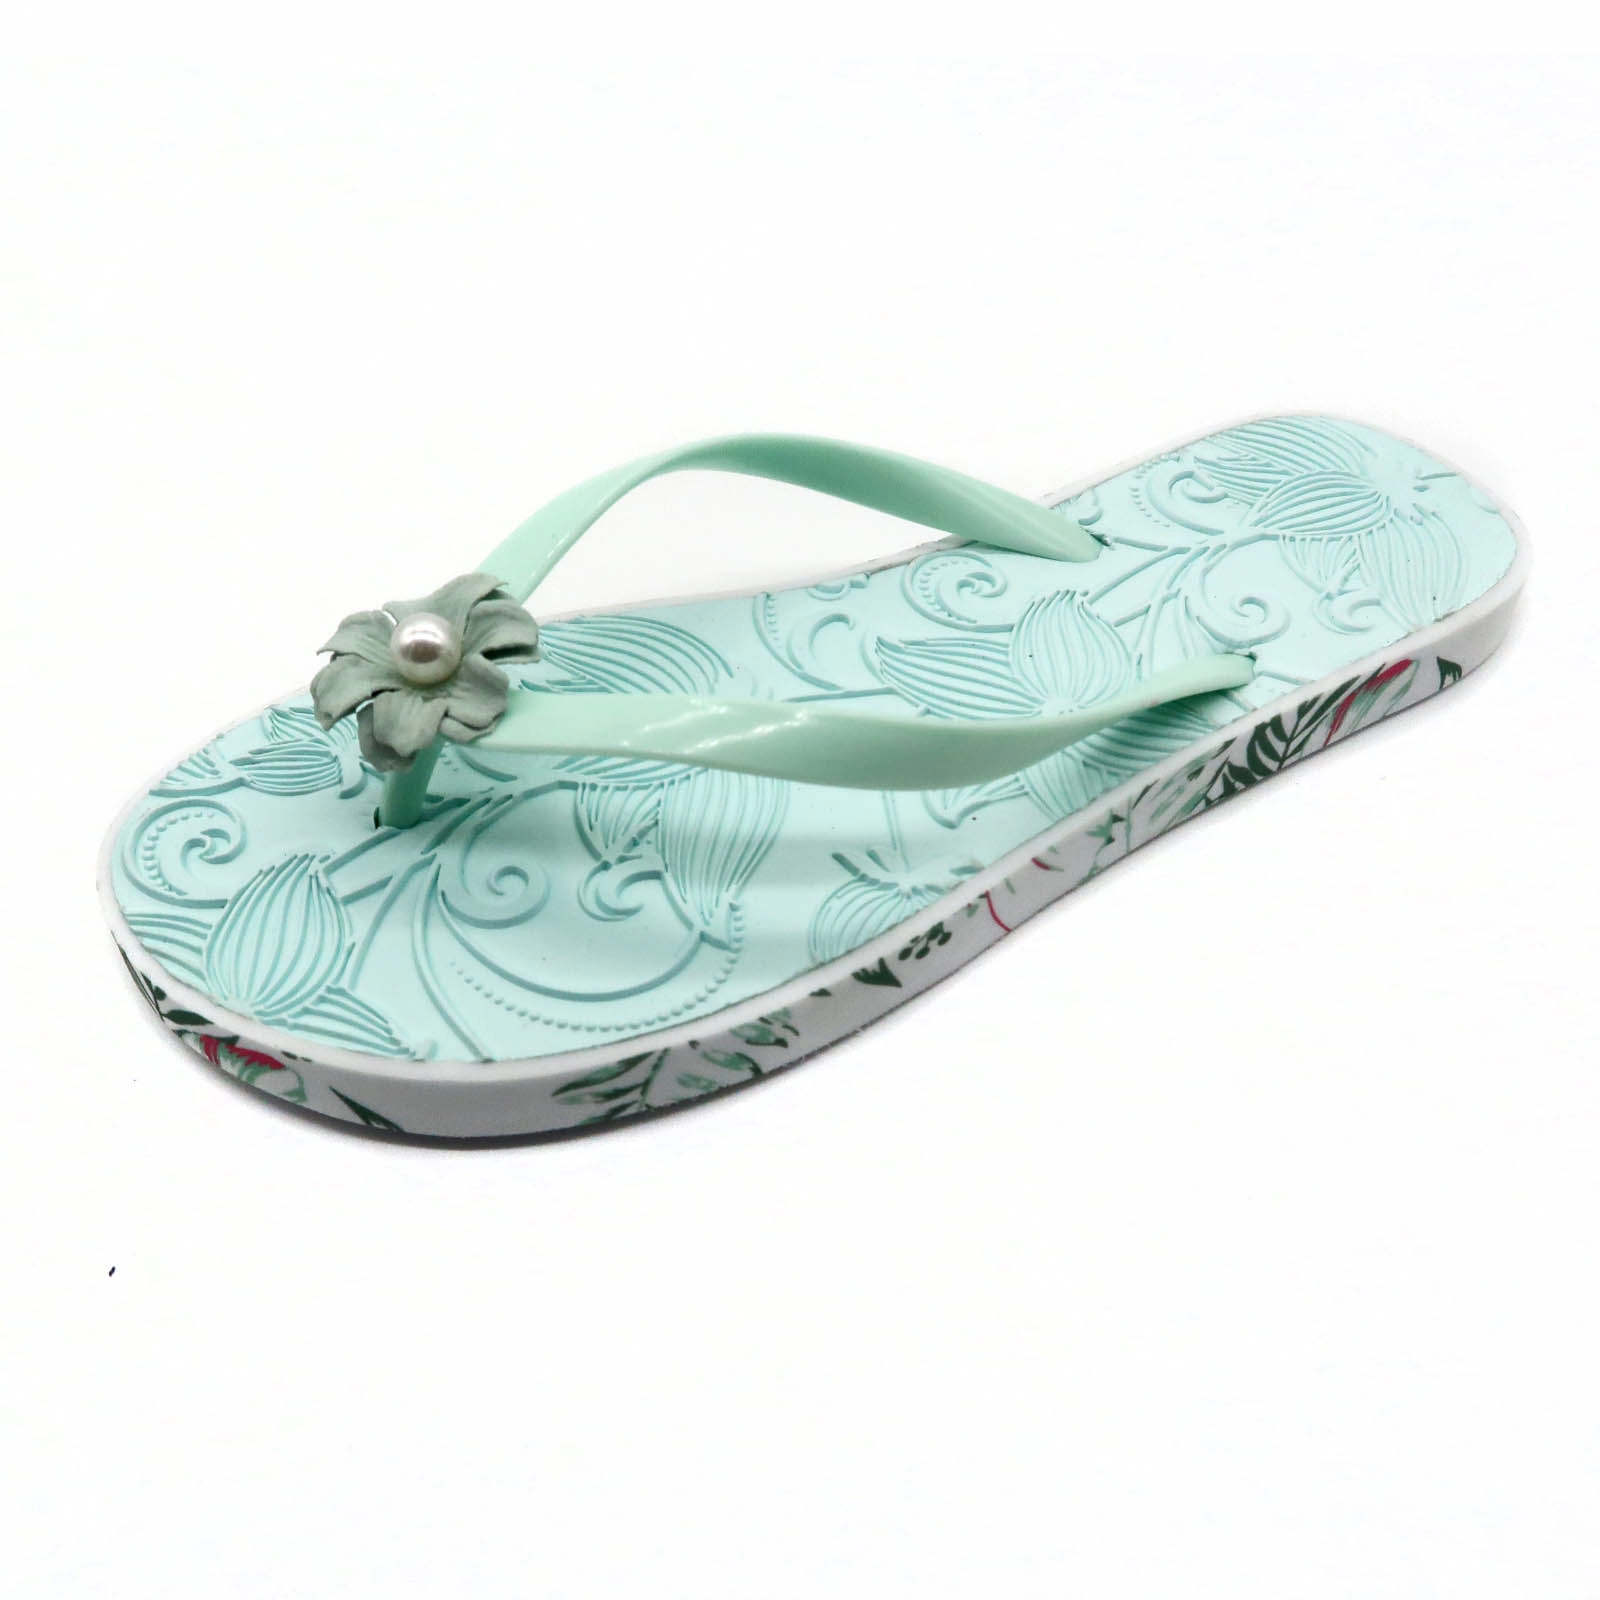 3D Deeped Embosse Flower On Insole and Printing Flower around sole edge Bold Design Flip Flop Slippers